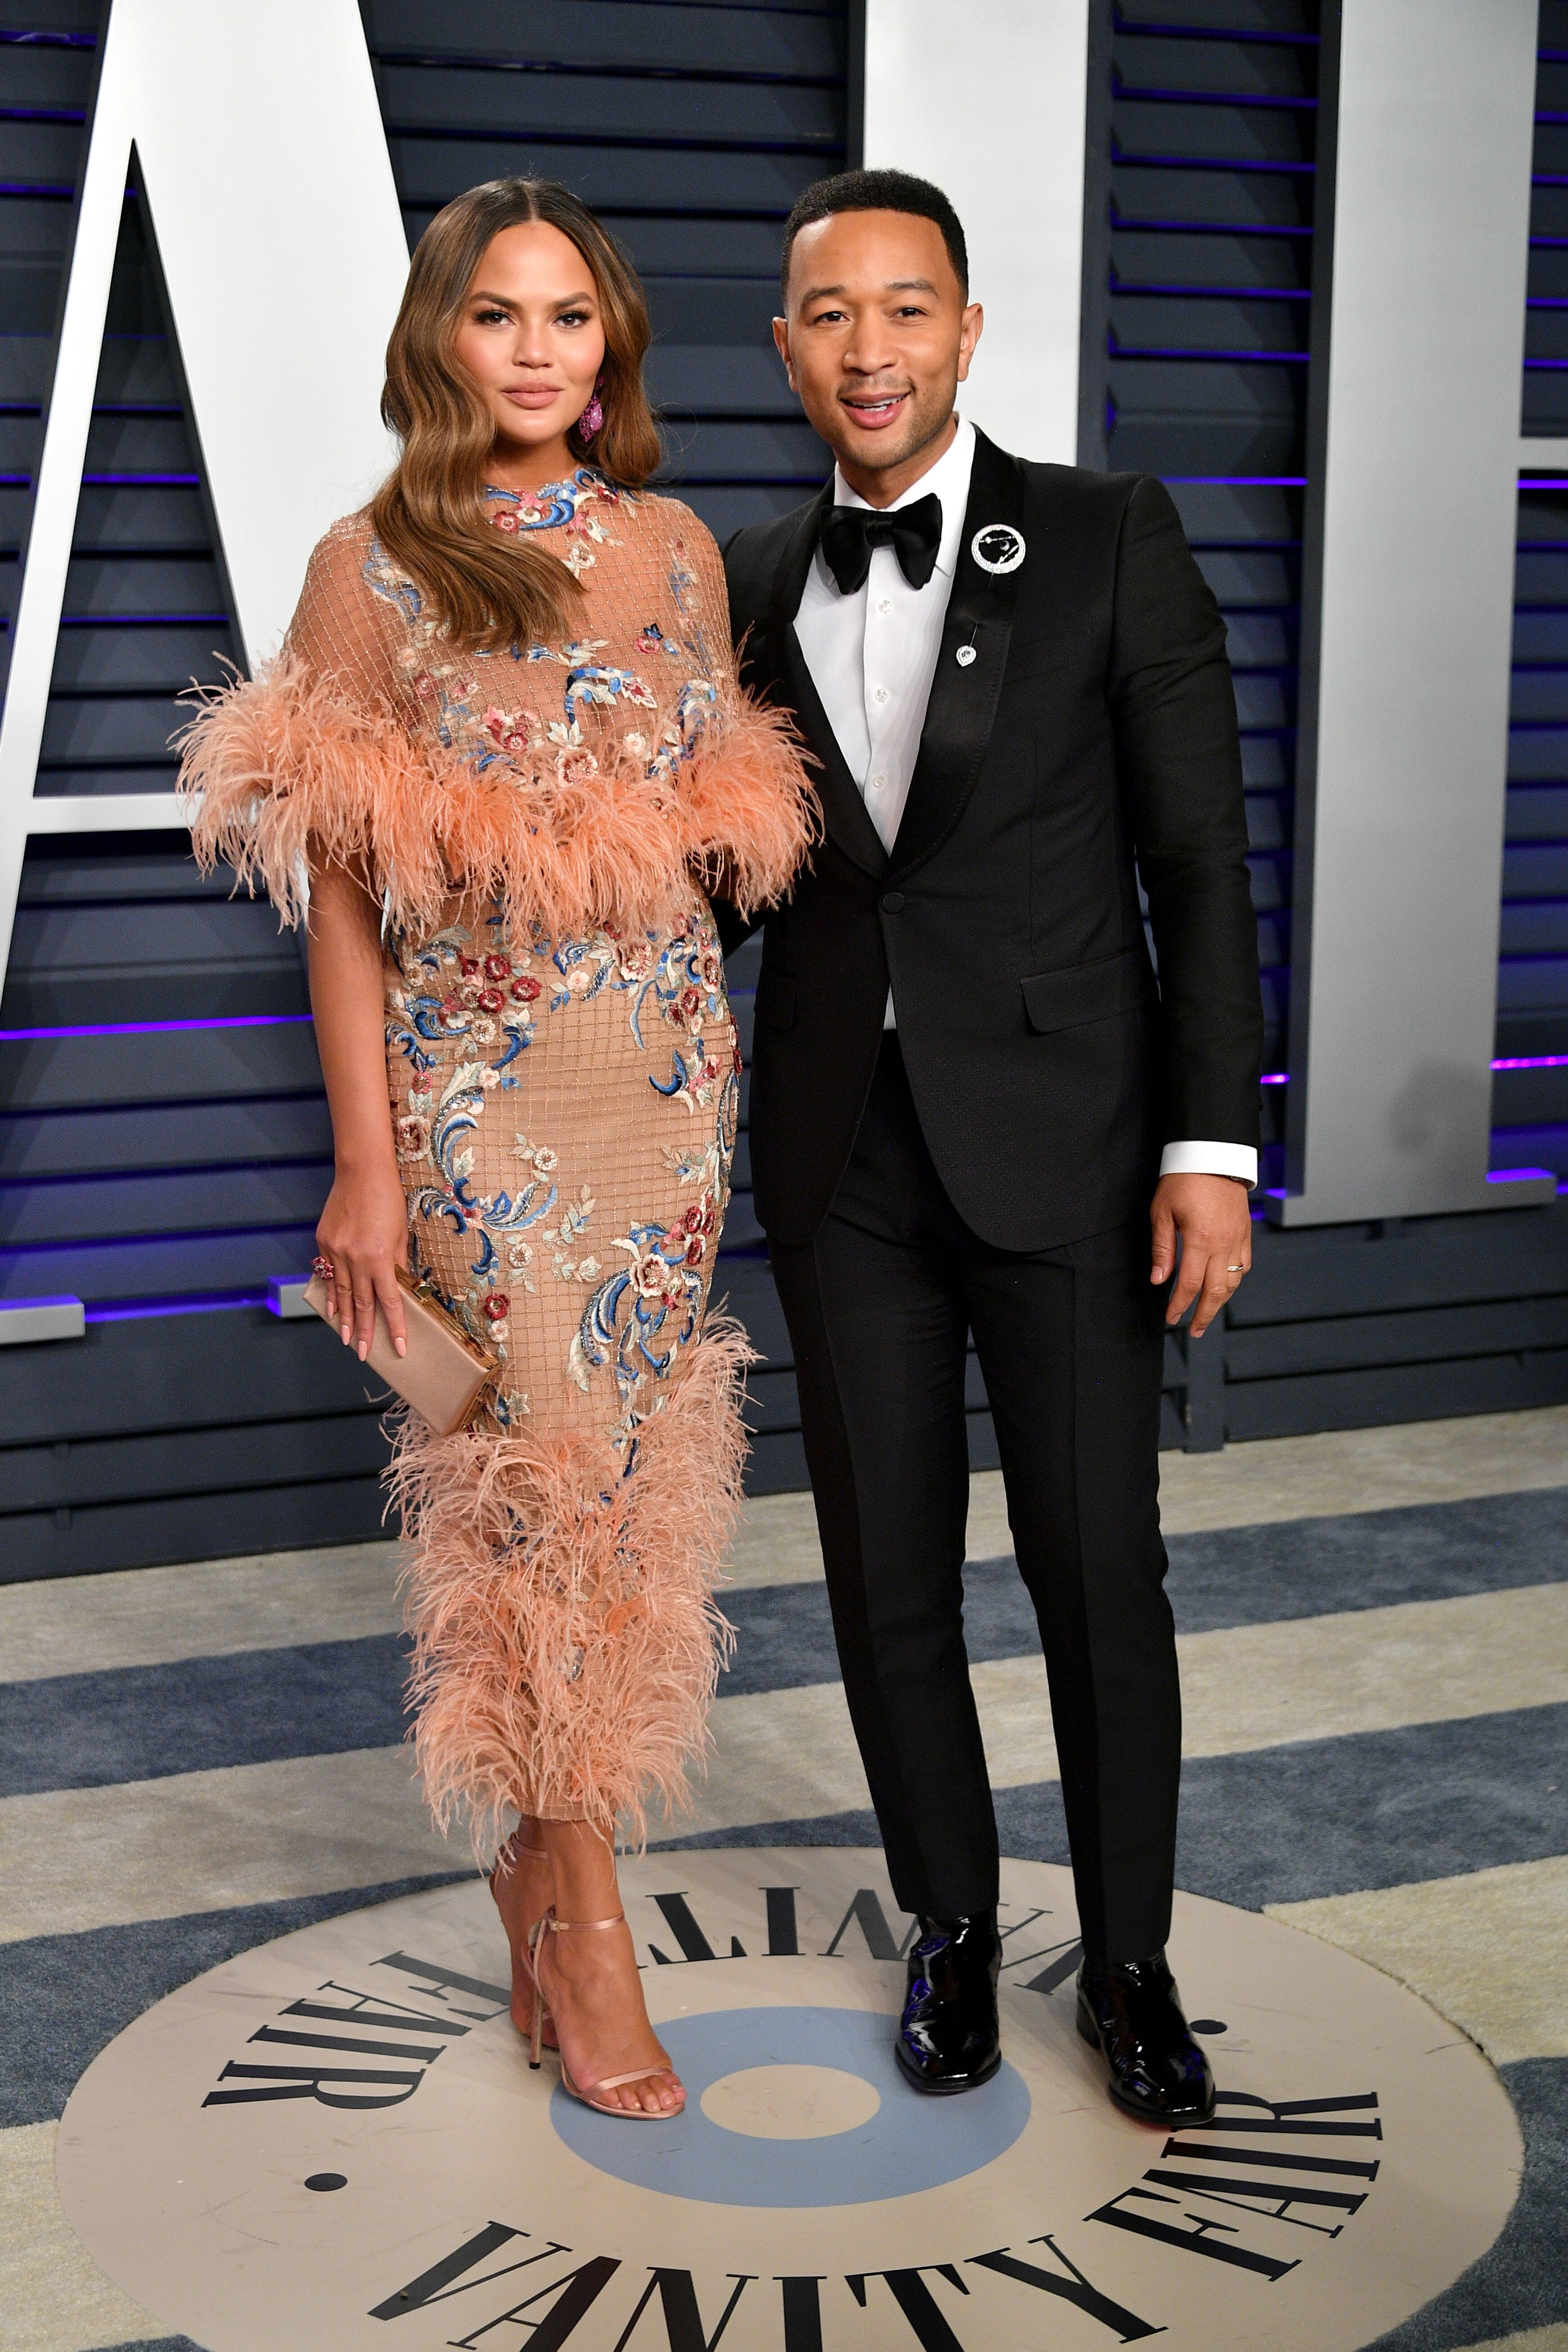 Chrissy Teigen and John Legend at the Vanity Fair Oscar Party on February 24, 2019, in Beverly Hills, California | Photo: Dia Dipasupil/Getty Images